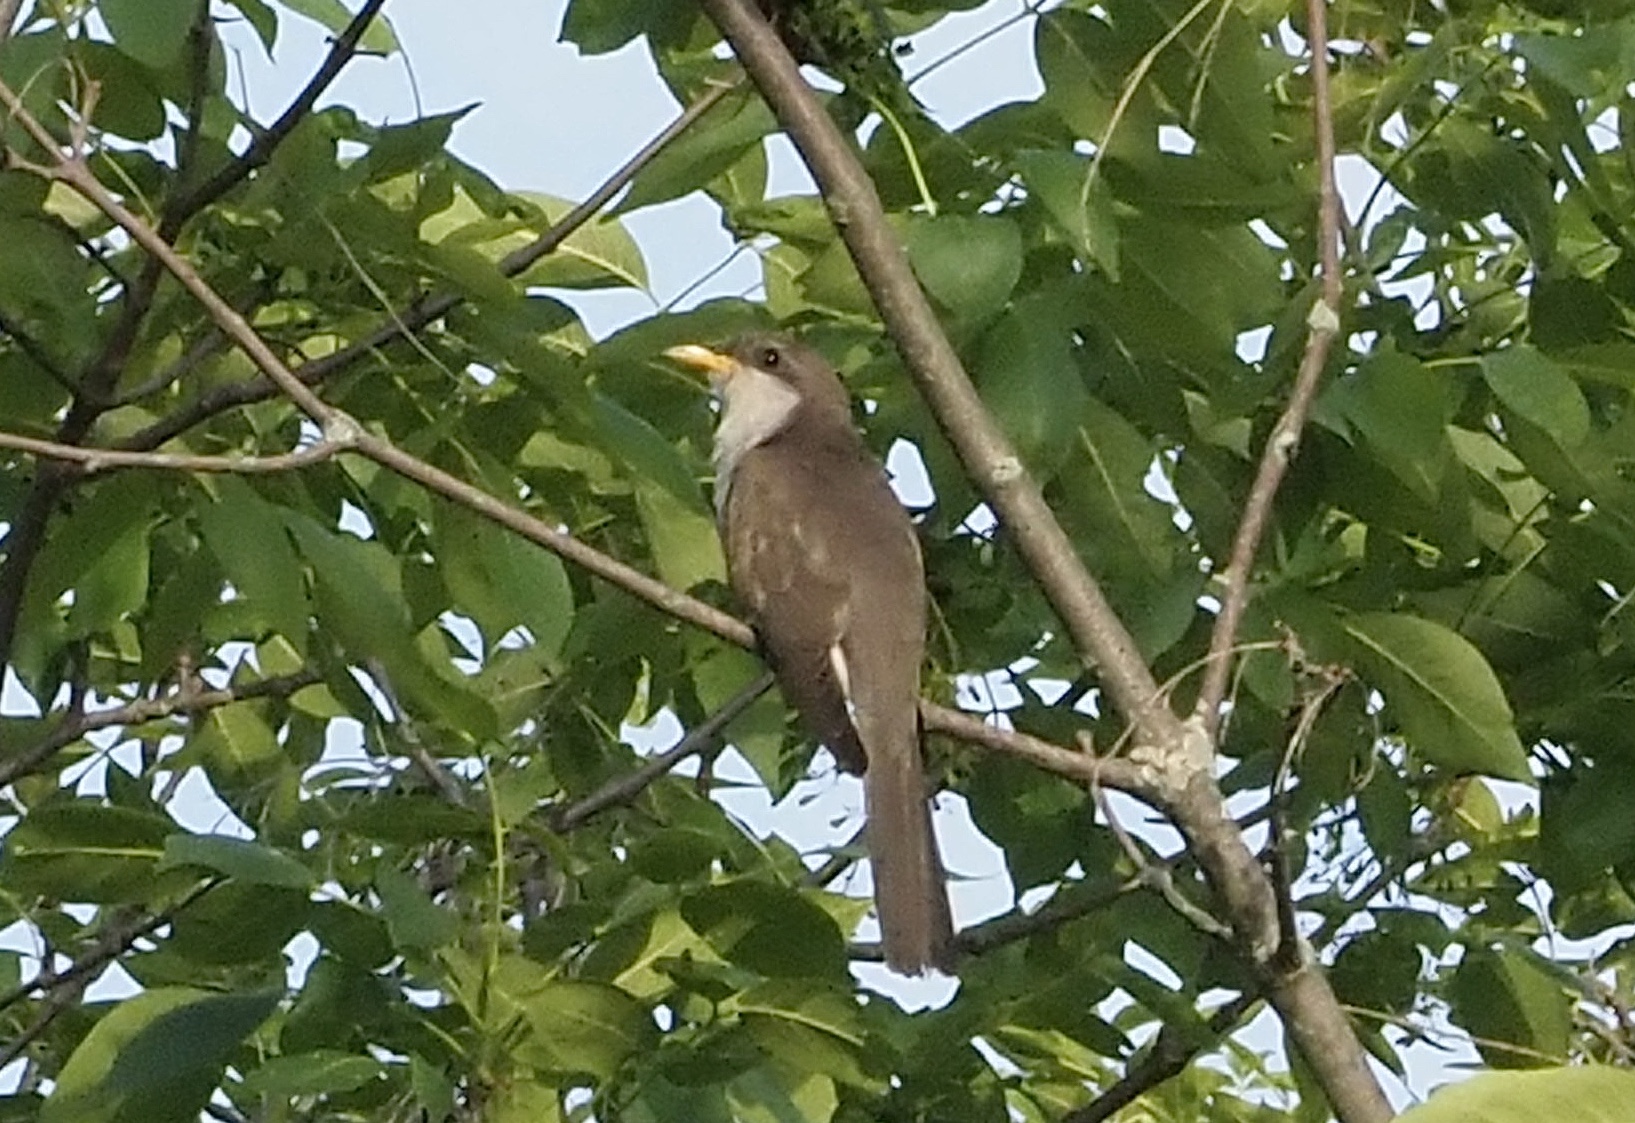 New York State Breeding Bird Survey: Observations of a Yellow-Billed Cuckoo - Archive